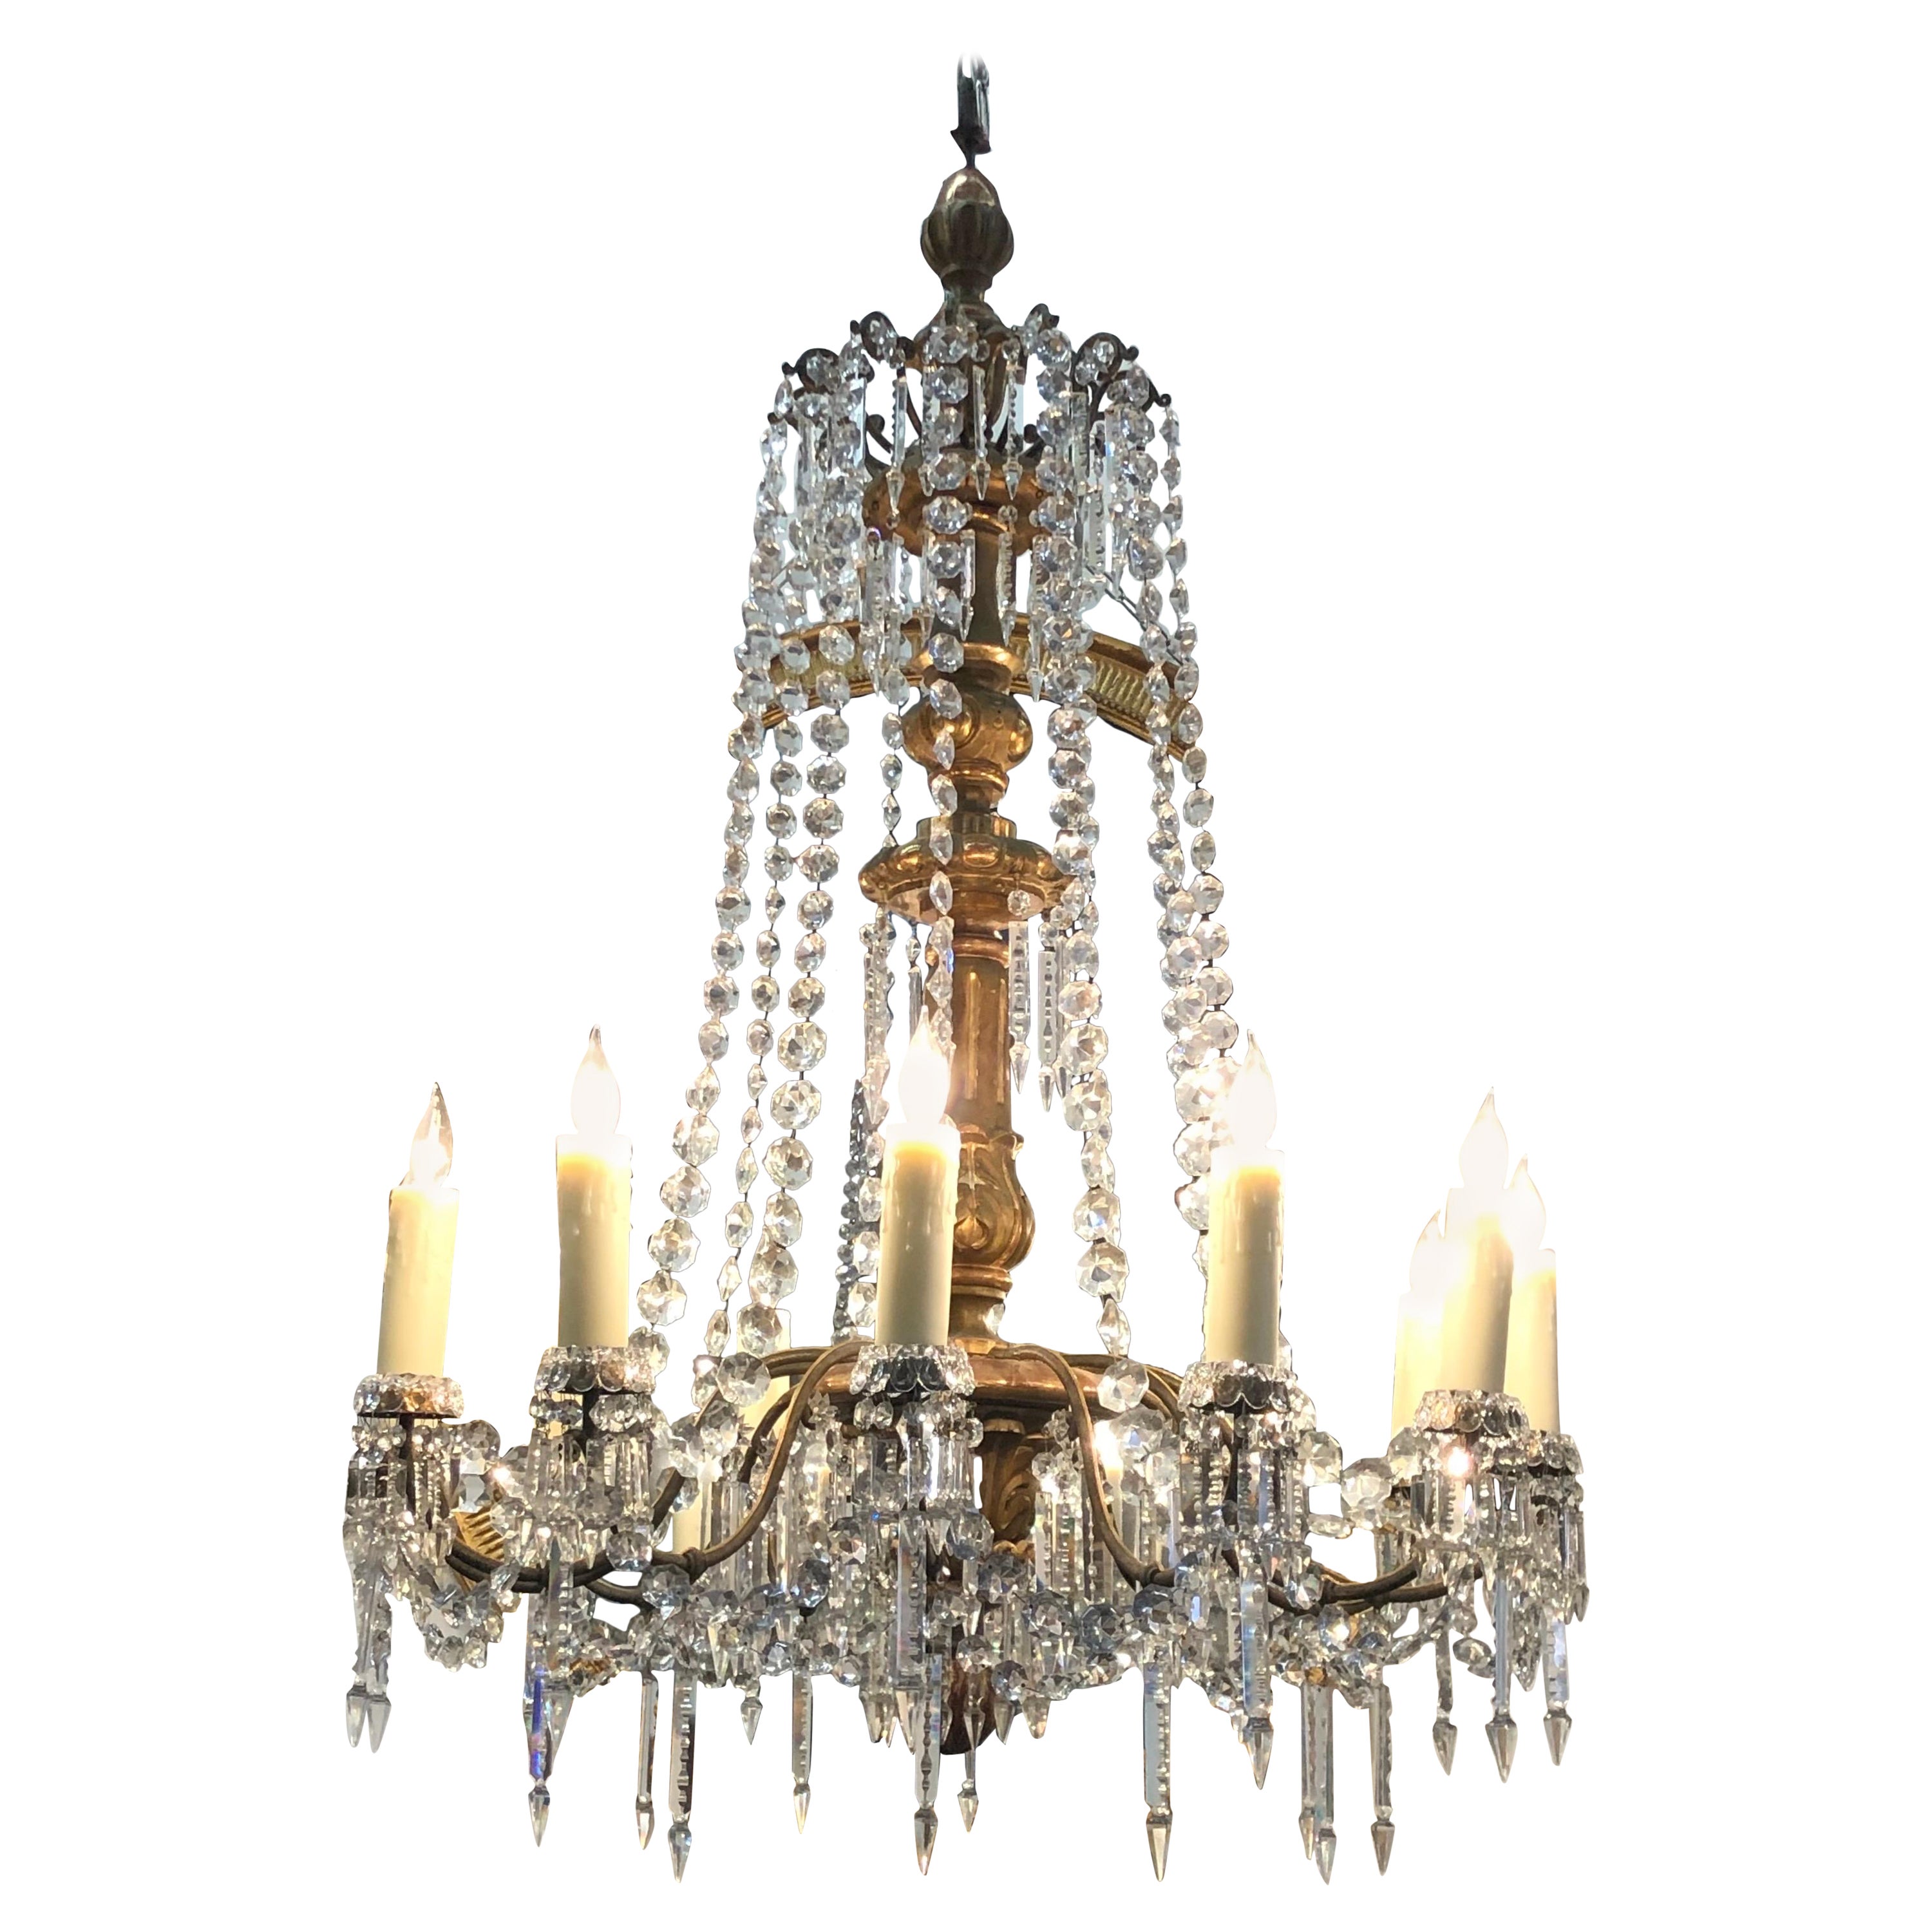 18th C. Italian Giltwood, Bronzed Lacquer & Crystal Louis XVI Period Chandelier